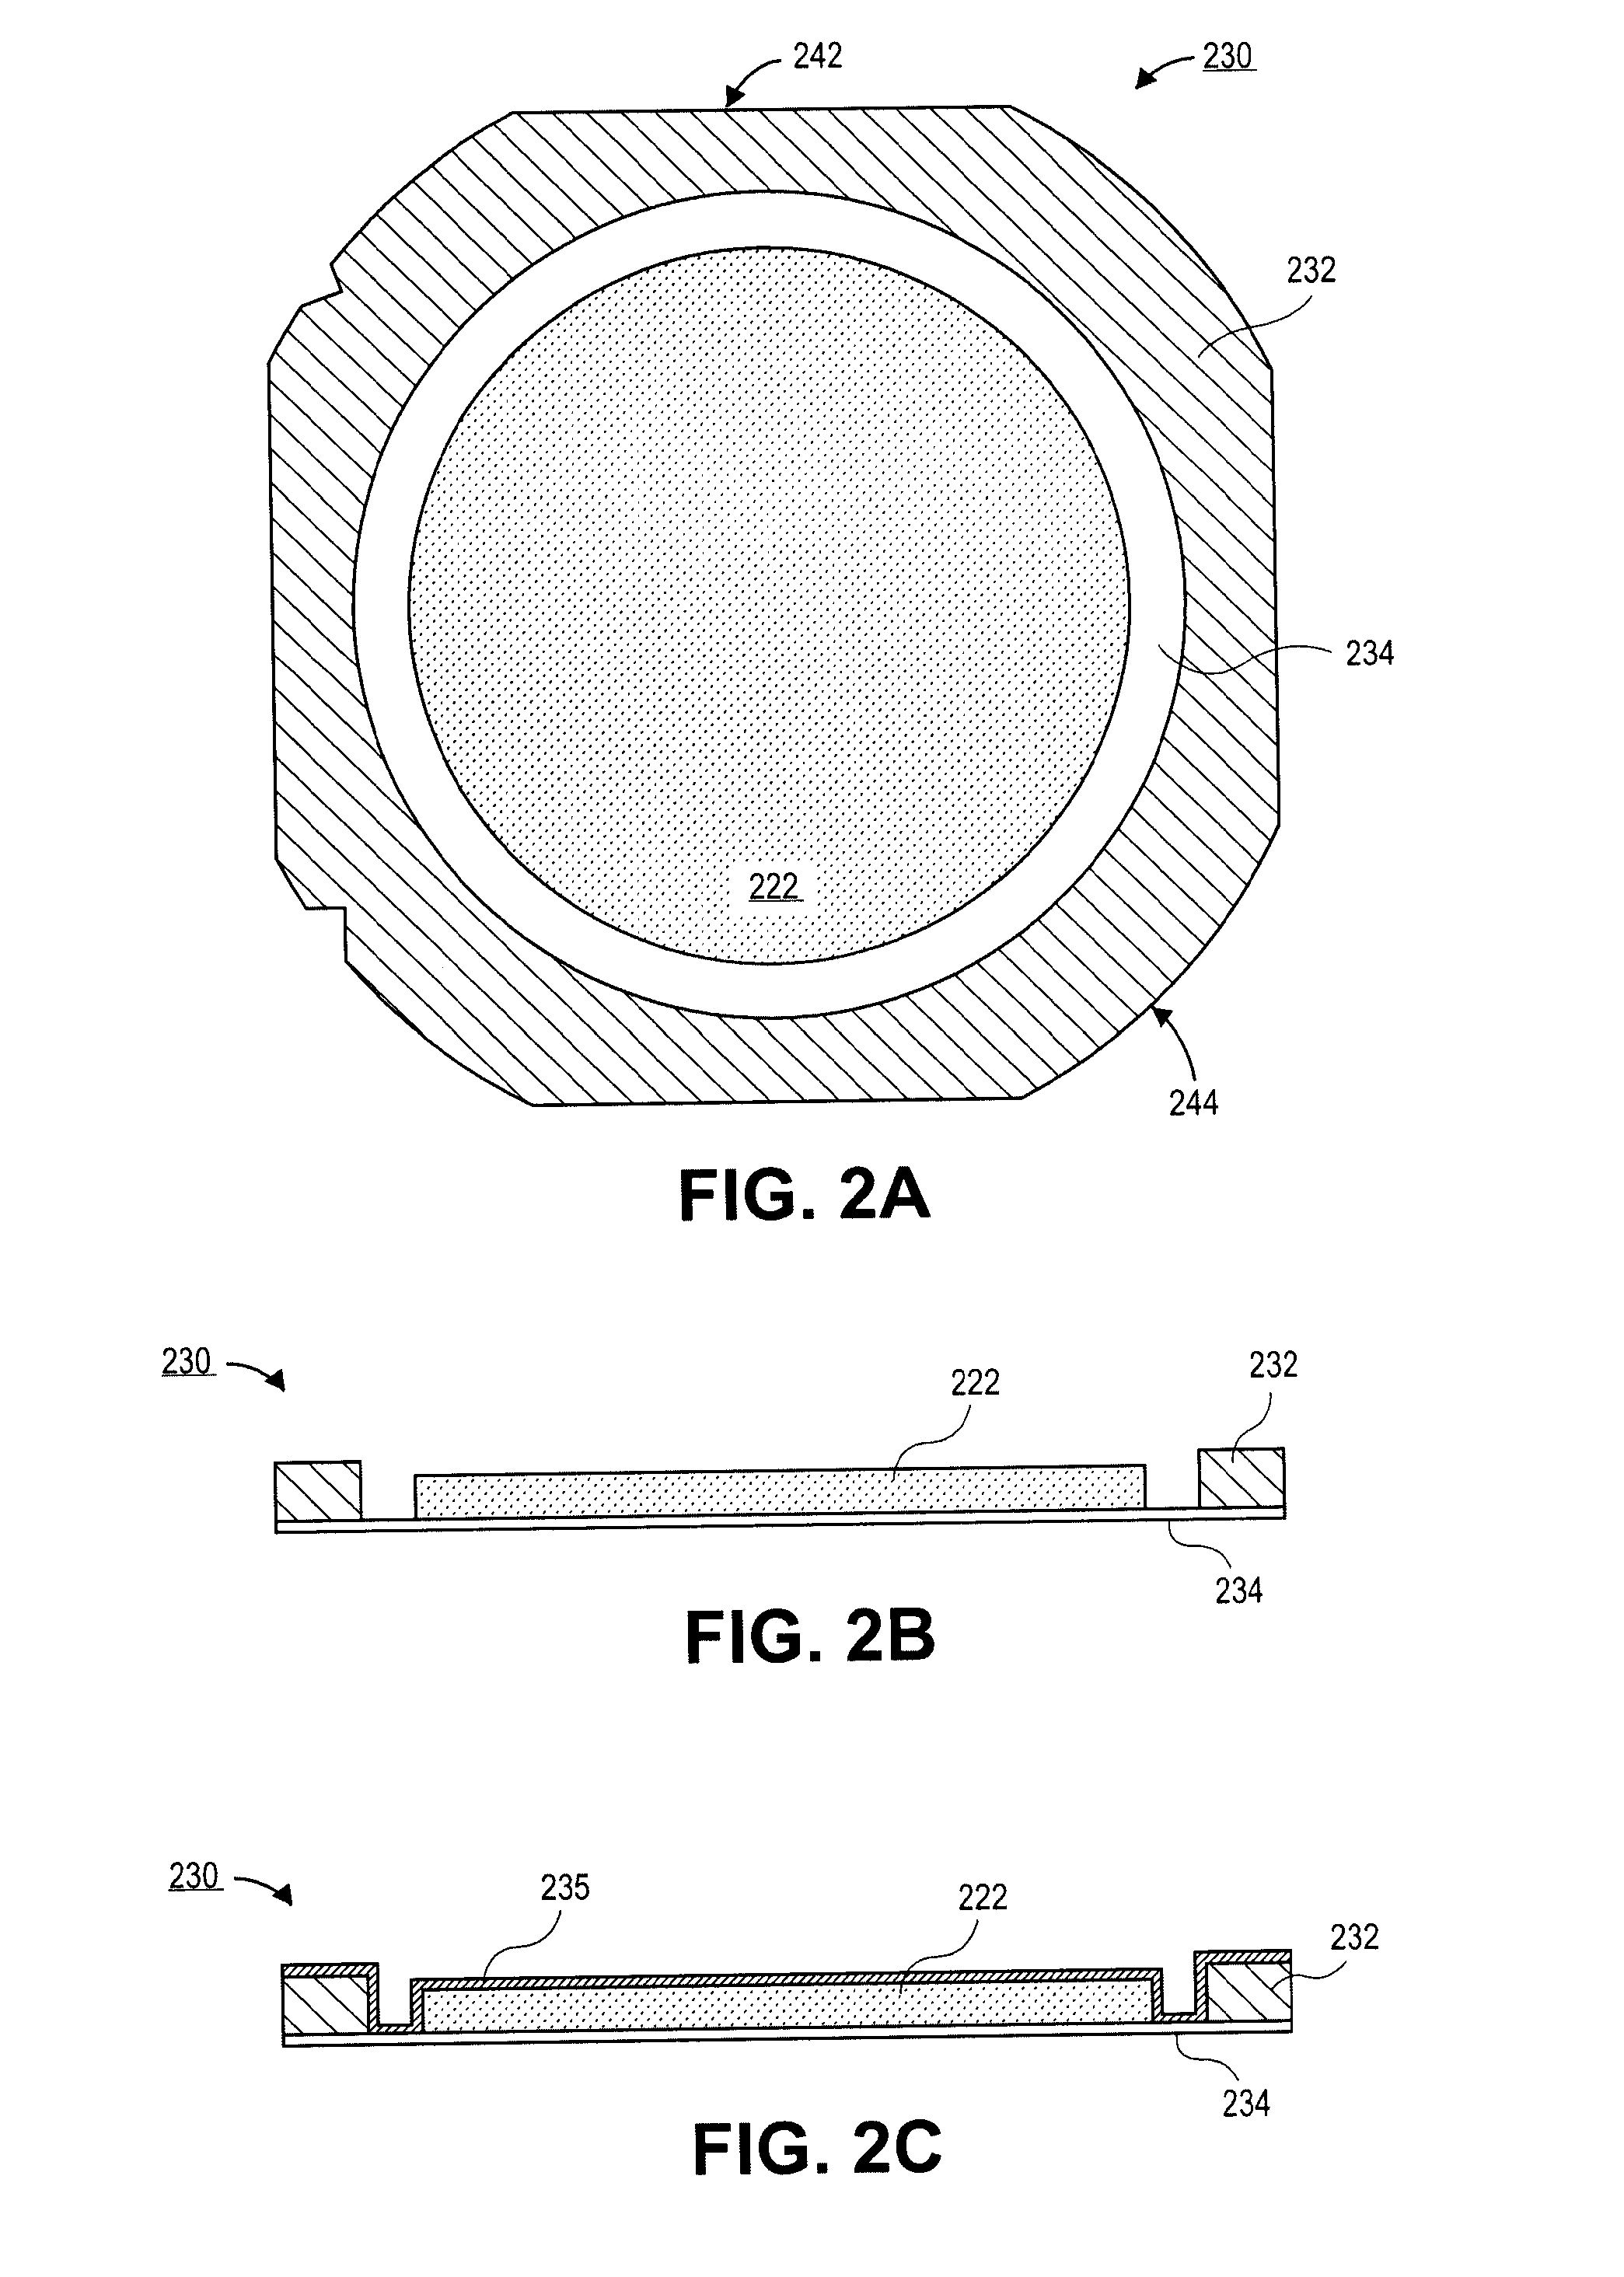 Method of outgassing a mask material deposited over a workpiece in a process tool